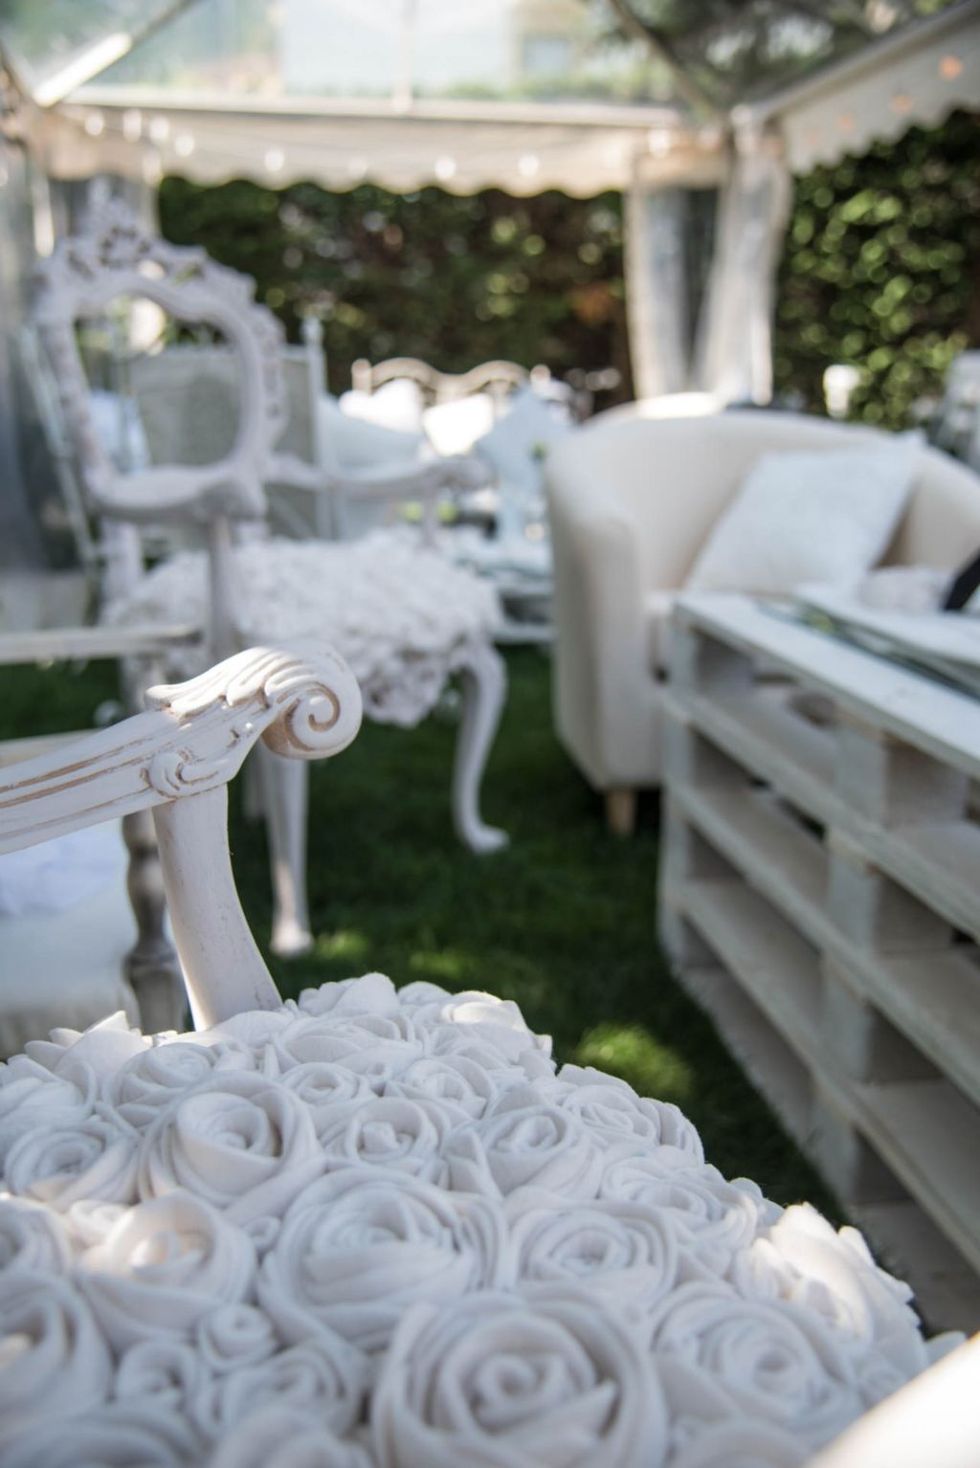 White, Chair, Outdoor furniture, Outdoor table, Design, Linens, Patio, Rose family, Wedding ceremony supply, Decoration, 